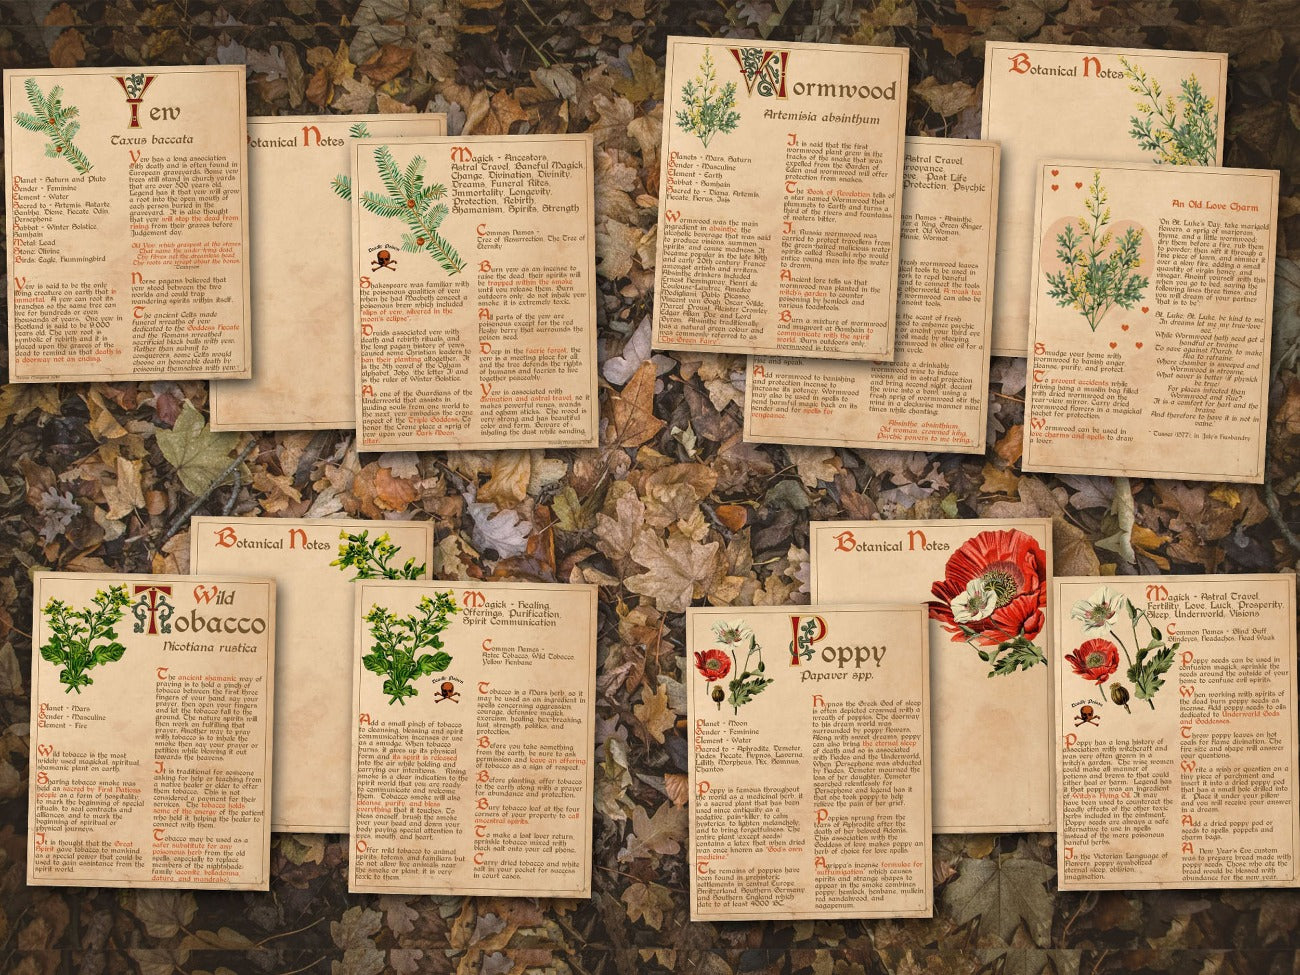 Yew, Wormwood, Wild Tobacco, and Poppy pages BANEFUL HERBS Bundle, 13 Poison Botanicals, 46 Witchcraft Pages of Ritual Poisonous Plants, Wicca Witch Herbal Grimoire of Baneful Plants - Morgana Magick Spell